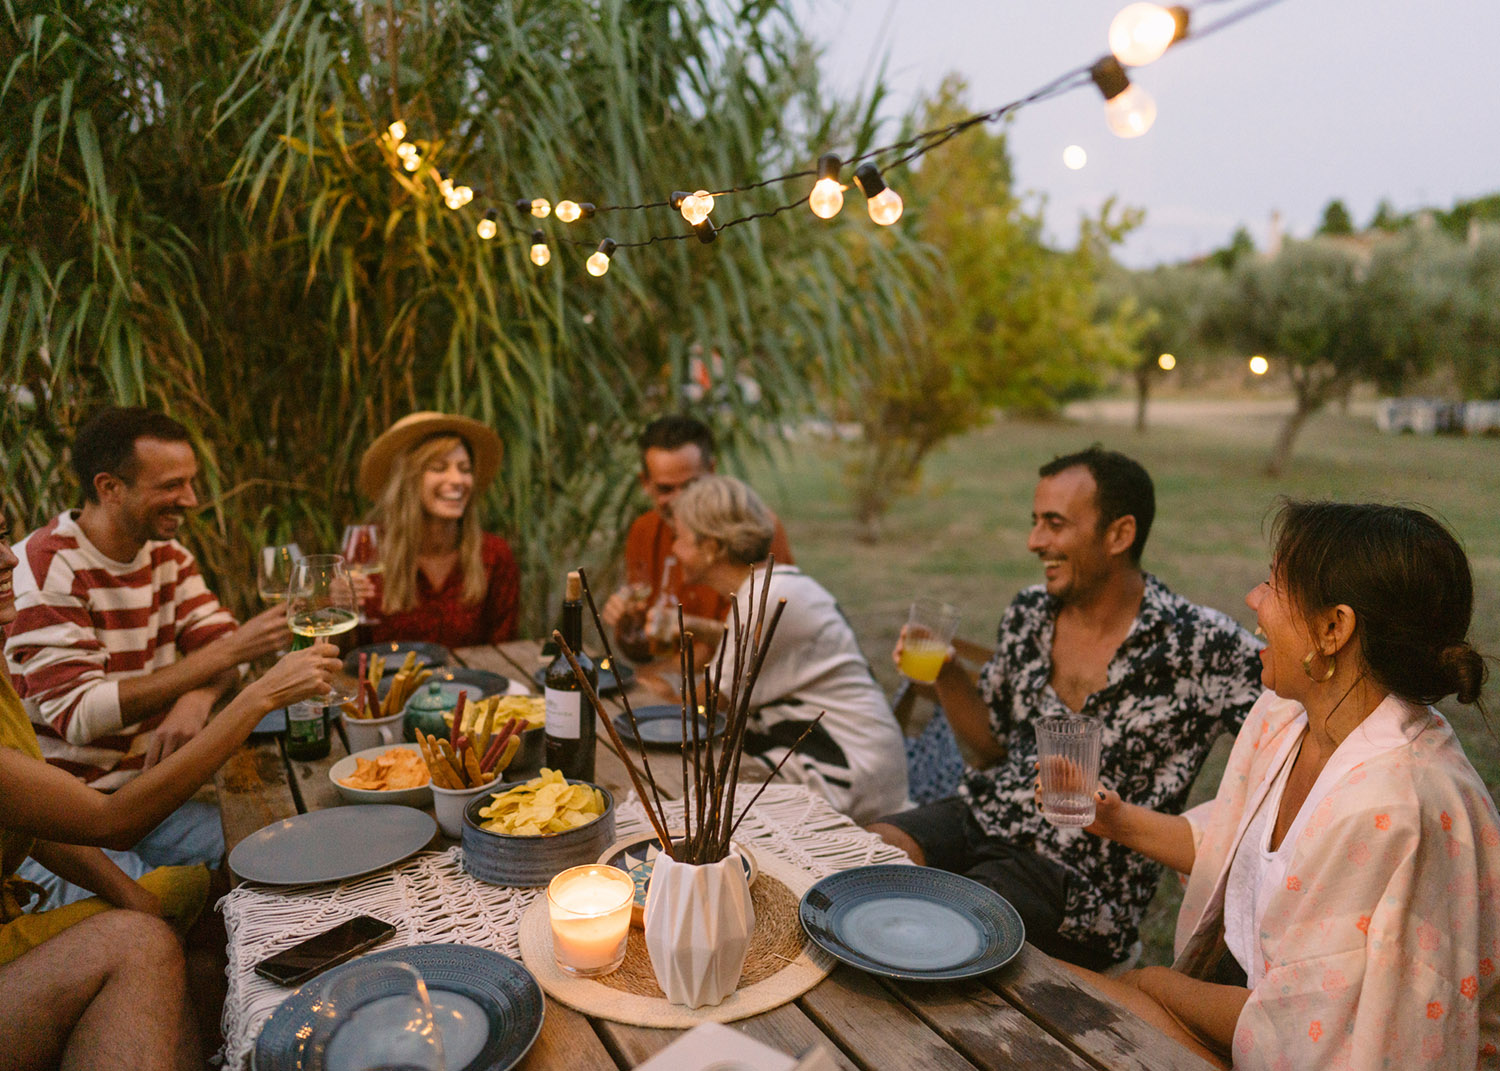 Photo of a small group of friends drinking wine and having fun while enjoying the summer dinner party outdoors.